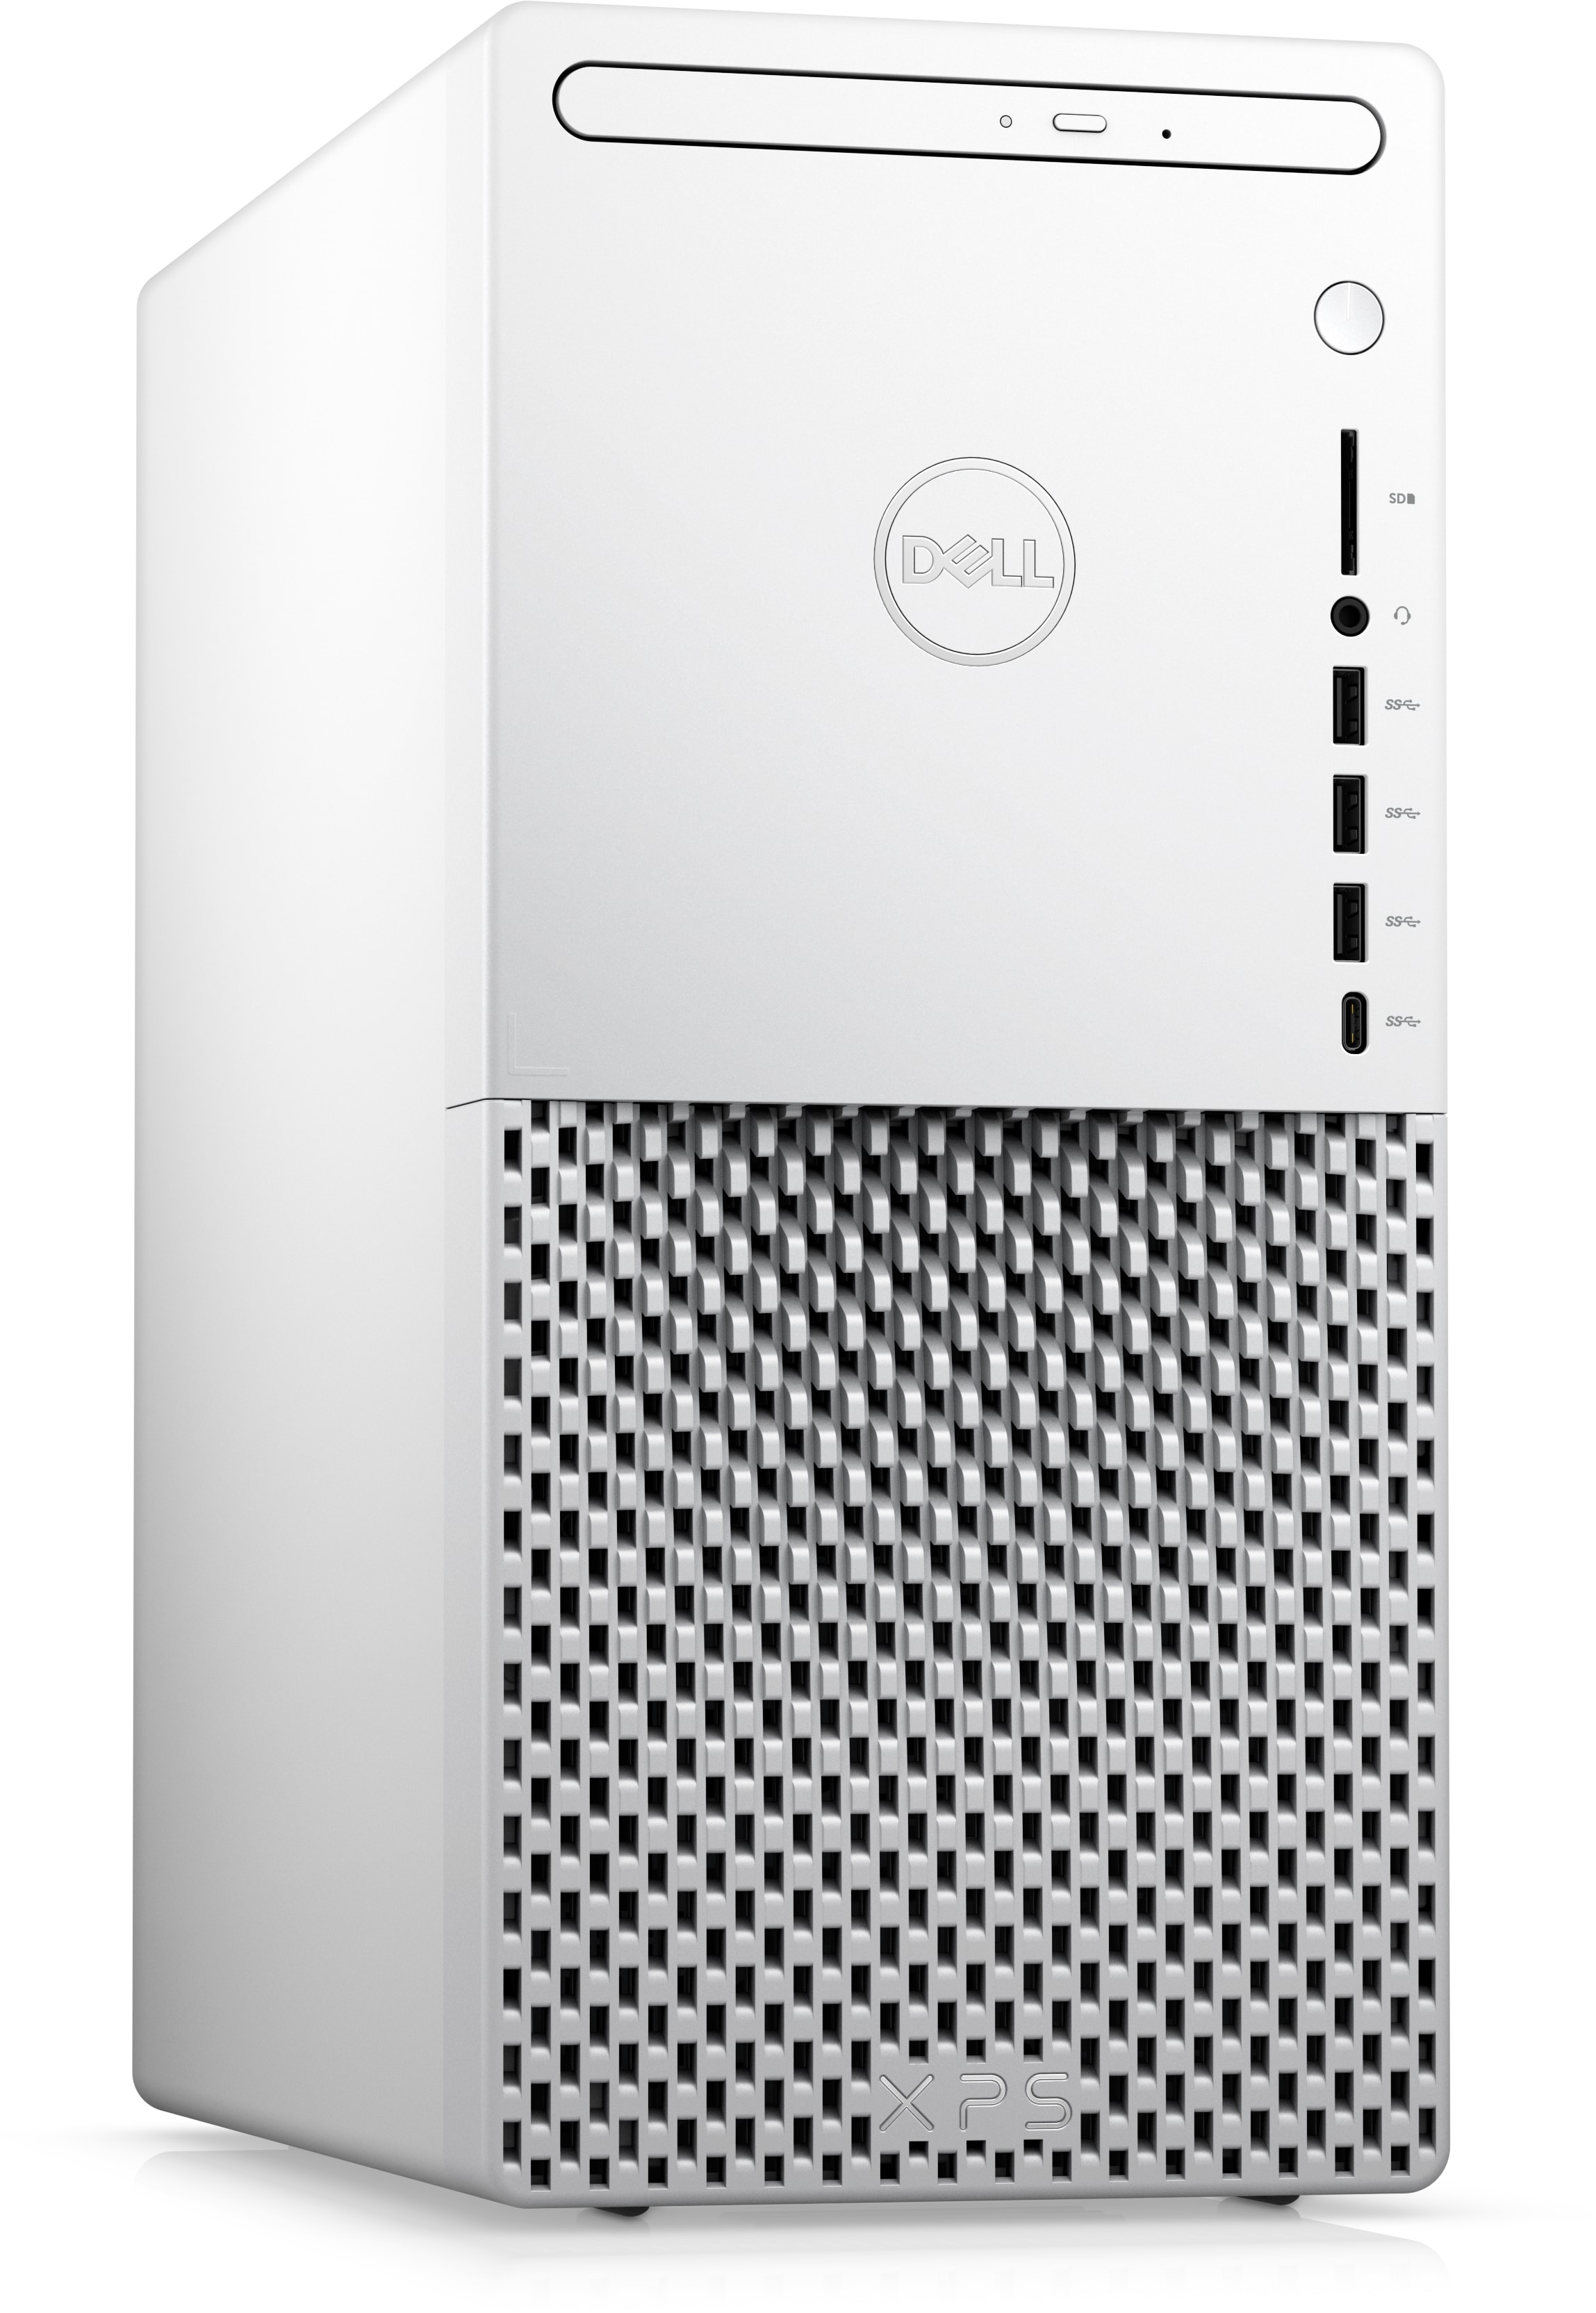 Dell XPS Desktop with up to 11th Gen Intel Processor | Dell USA